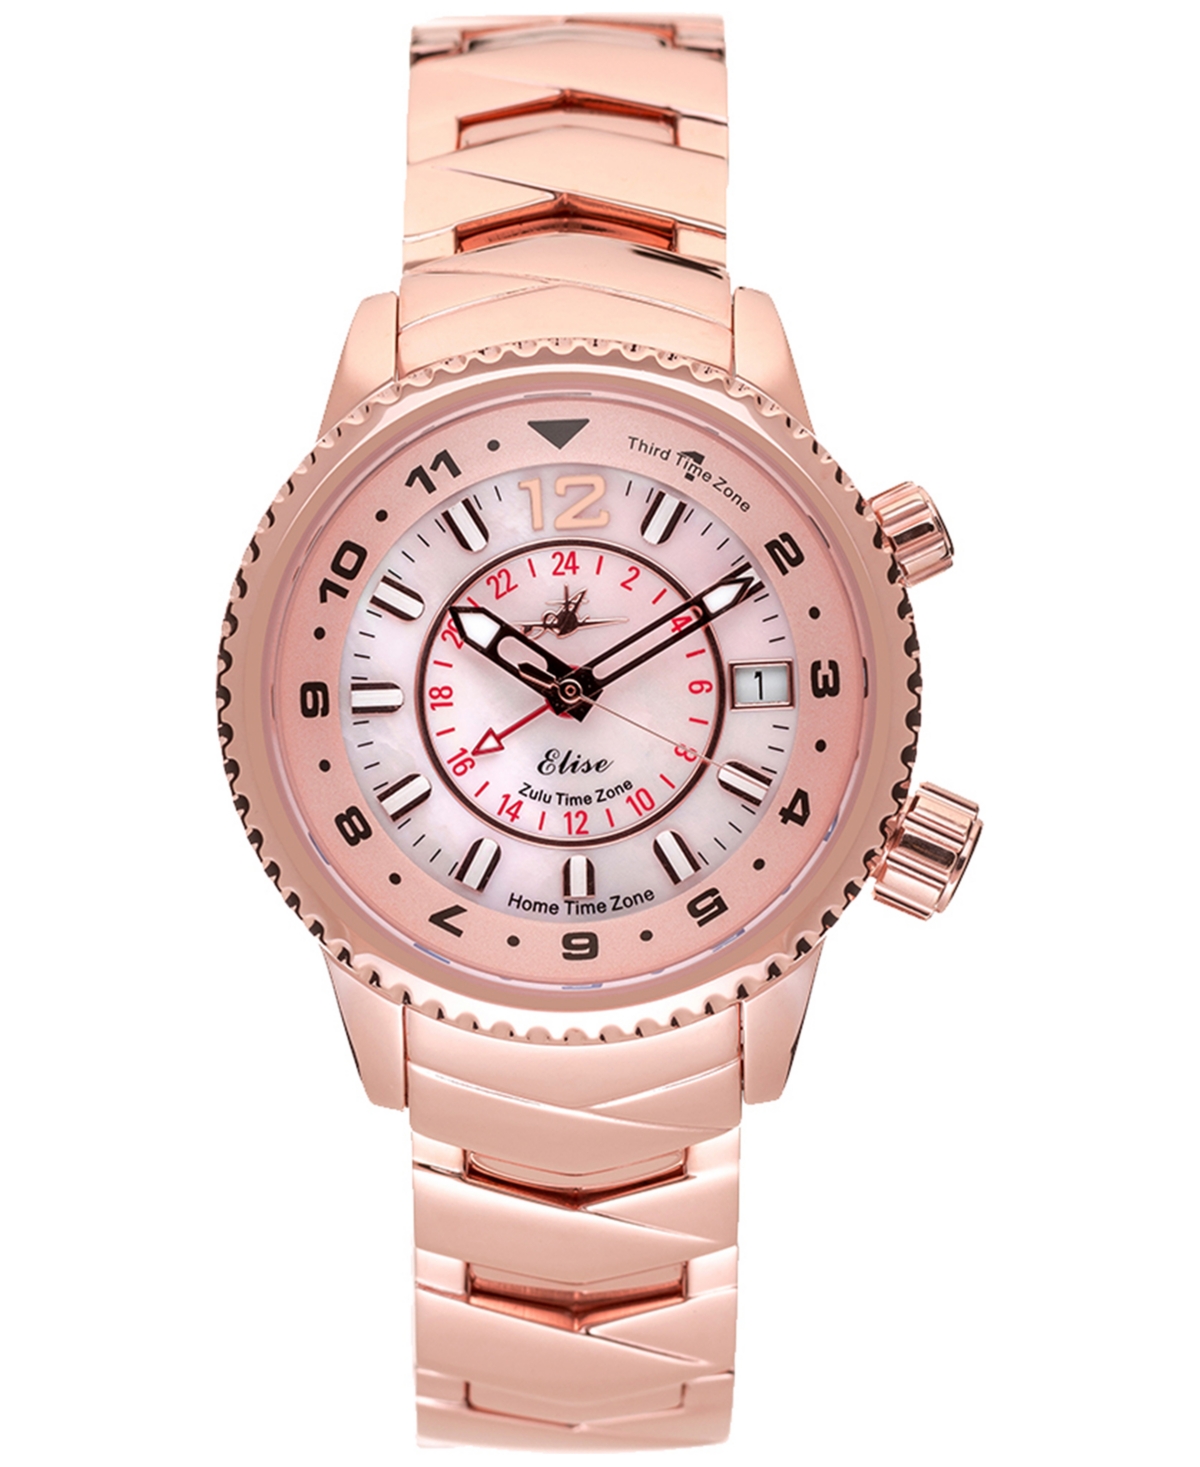 Abingdon Co. Women's Elise Swiss Tri-time Rose Gold-tone Ion-plated Stainless Steel Bracelet Watch 33mm